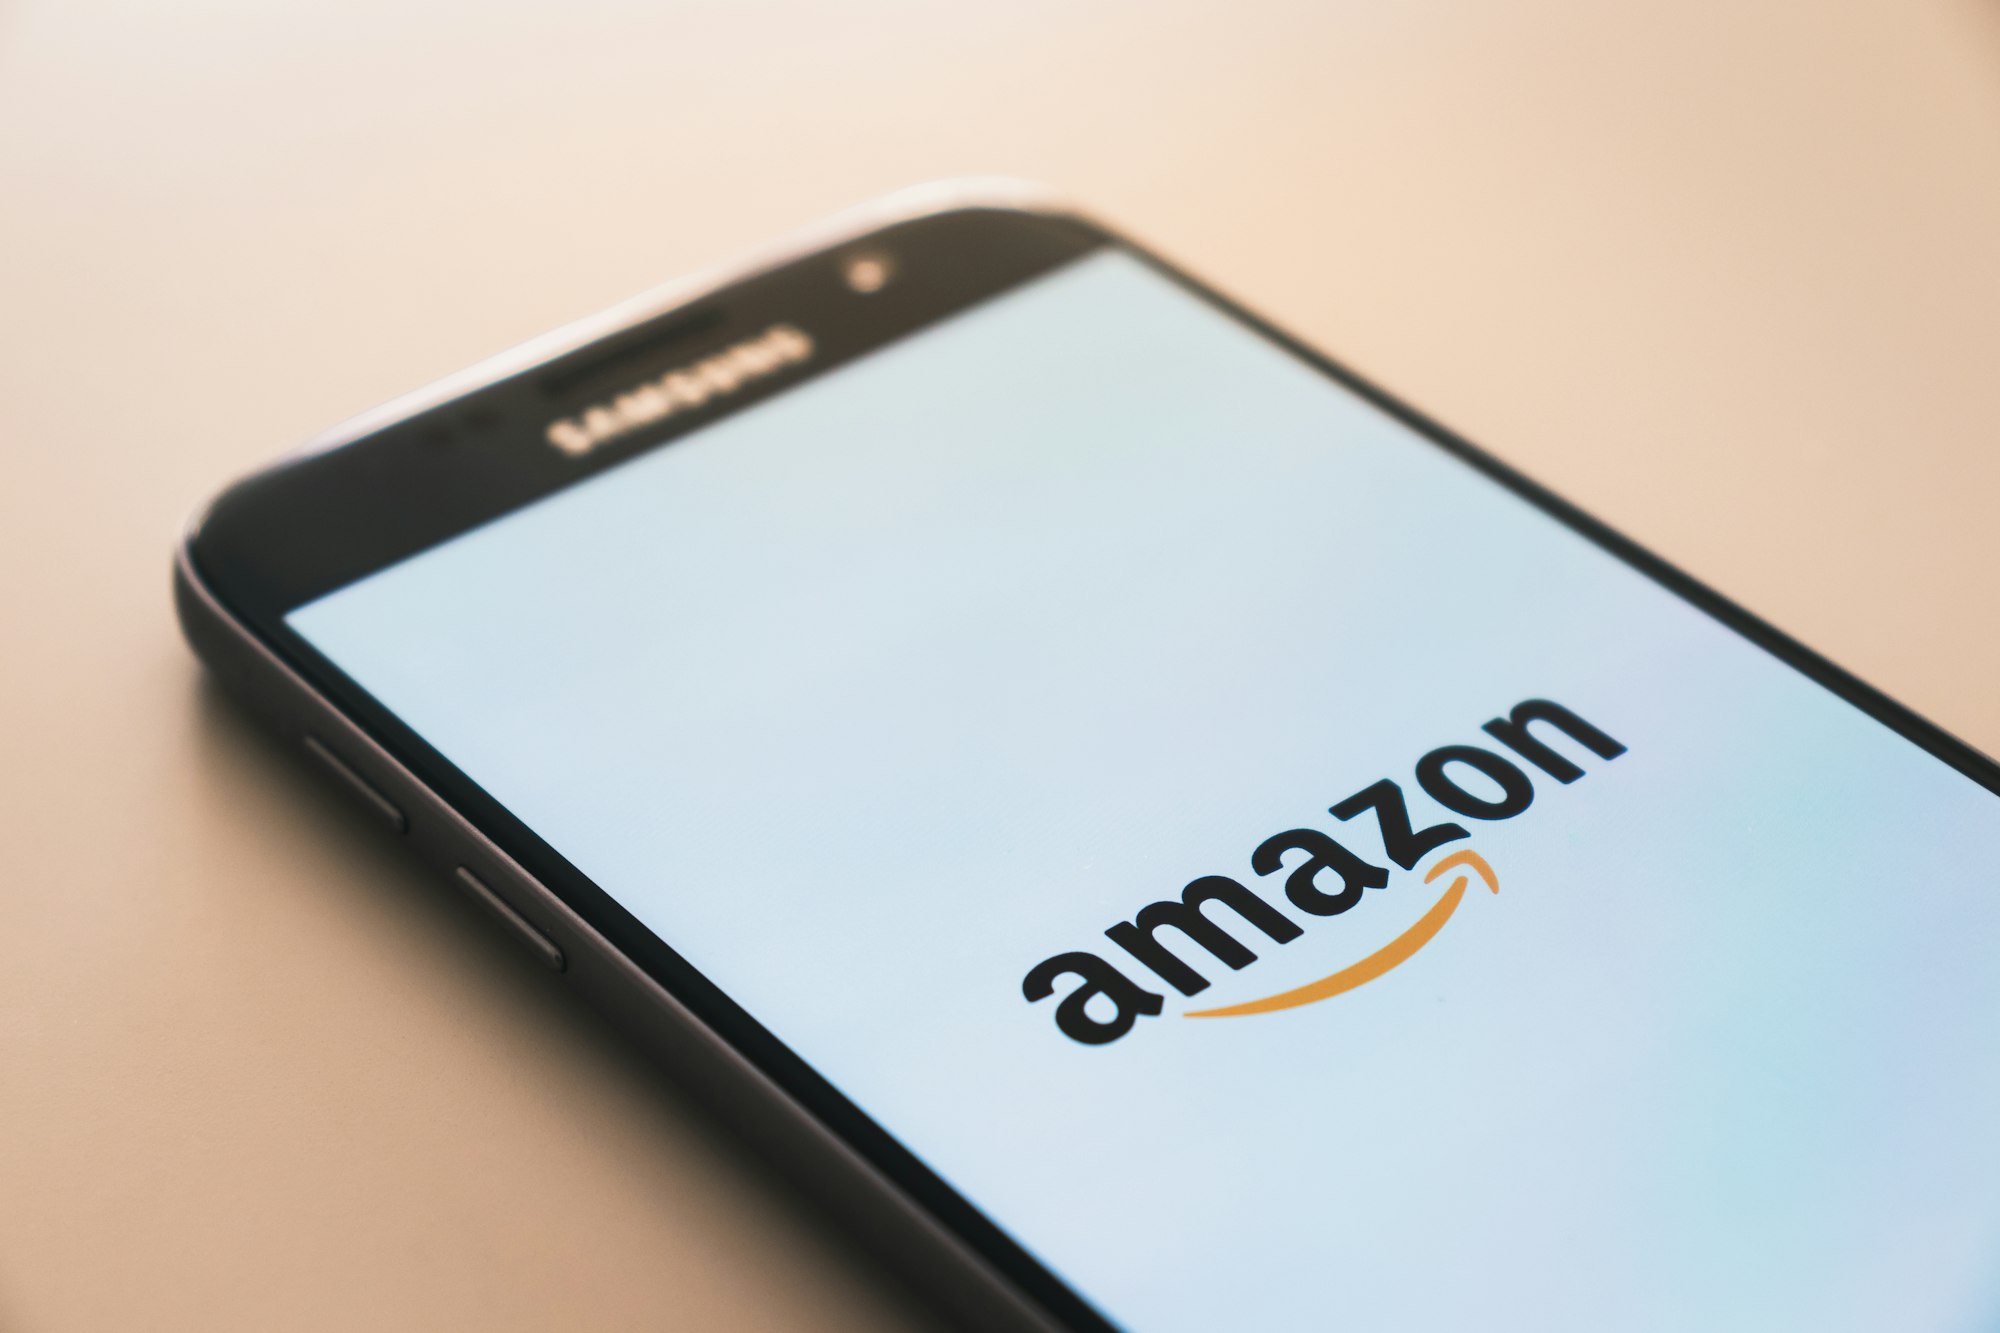 How Much Is Your Data worth? Amazon Has Begun Paying  Some Users $2 A Month To Let The E-Commerce Giant Monitor Their Phone Traffic.